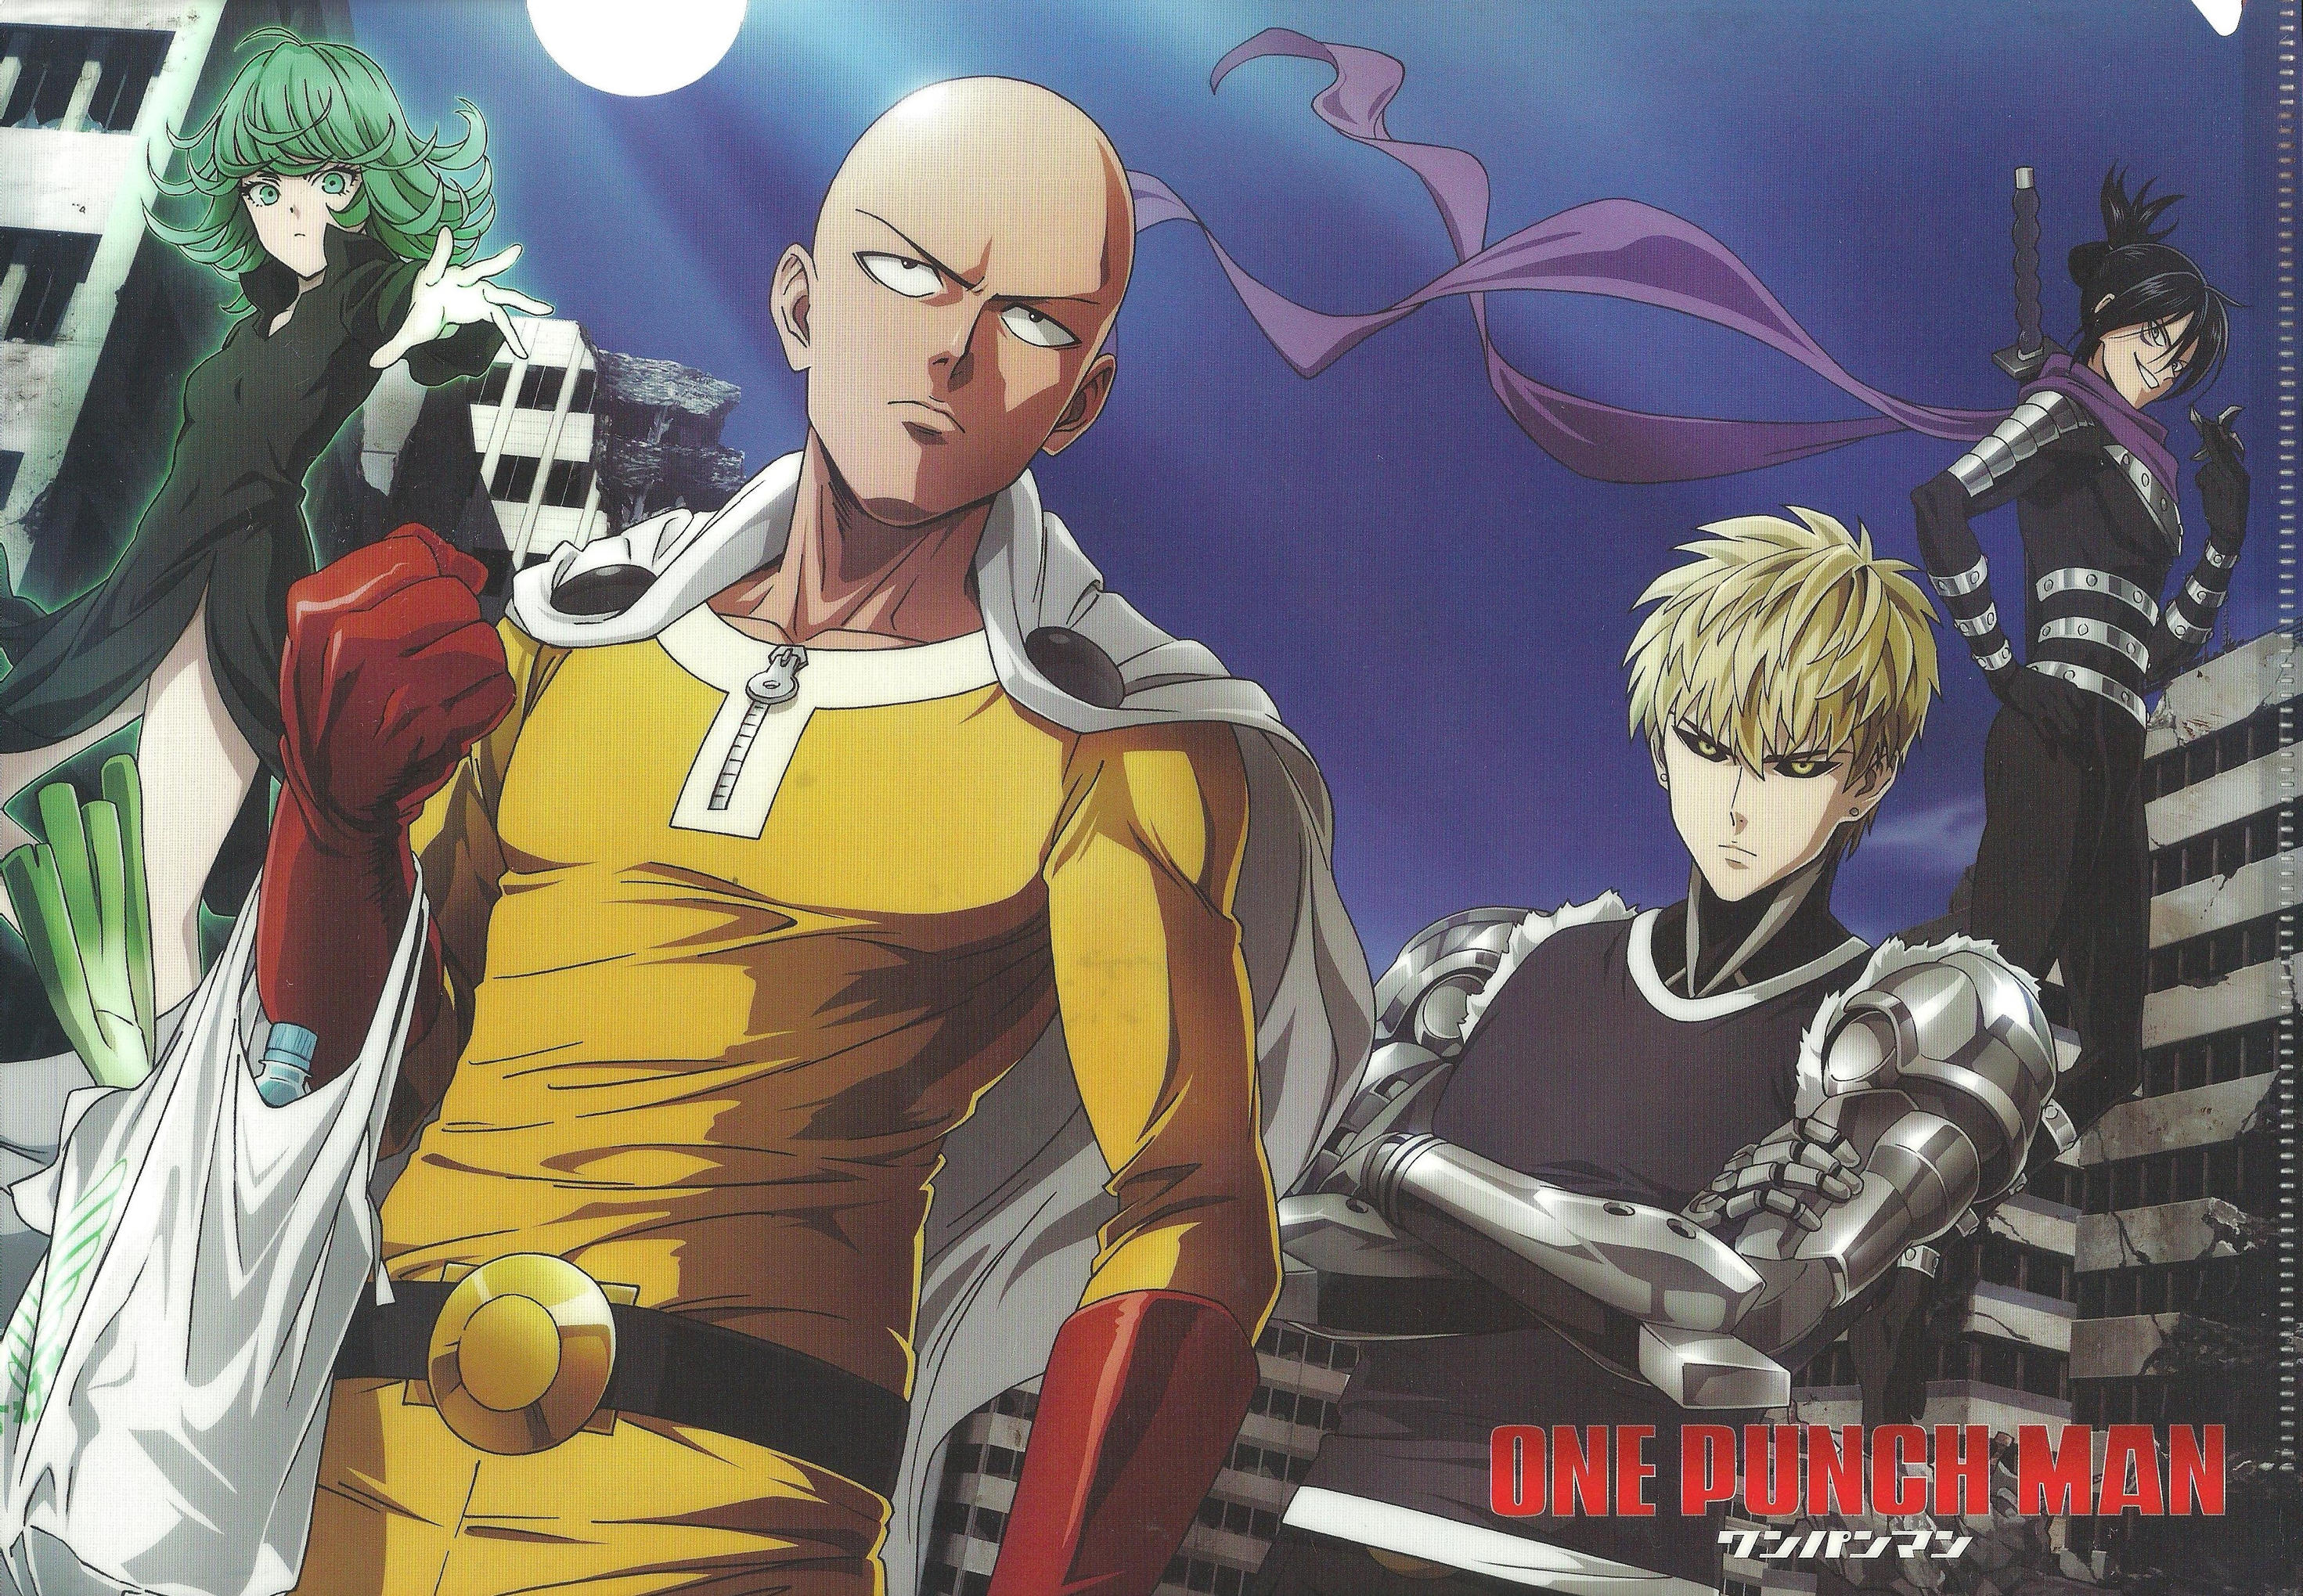 4. Saitama from One Punch Man - wide 4